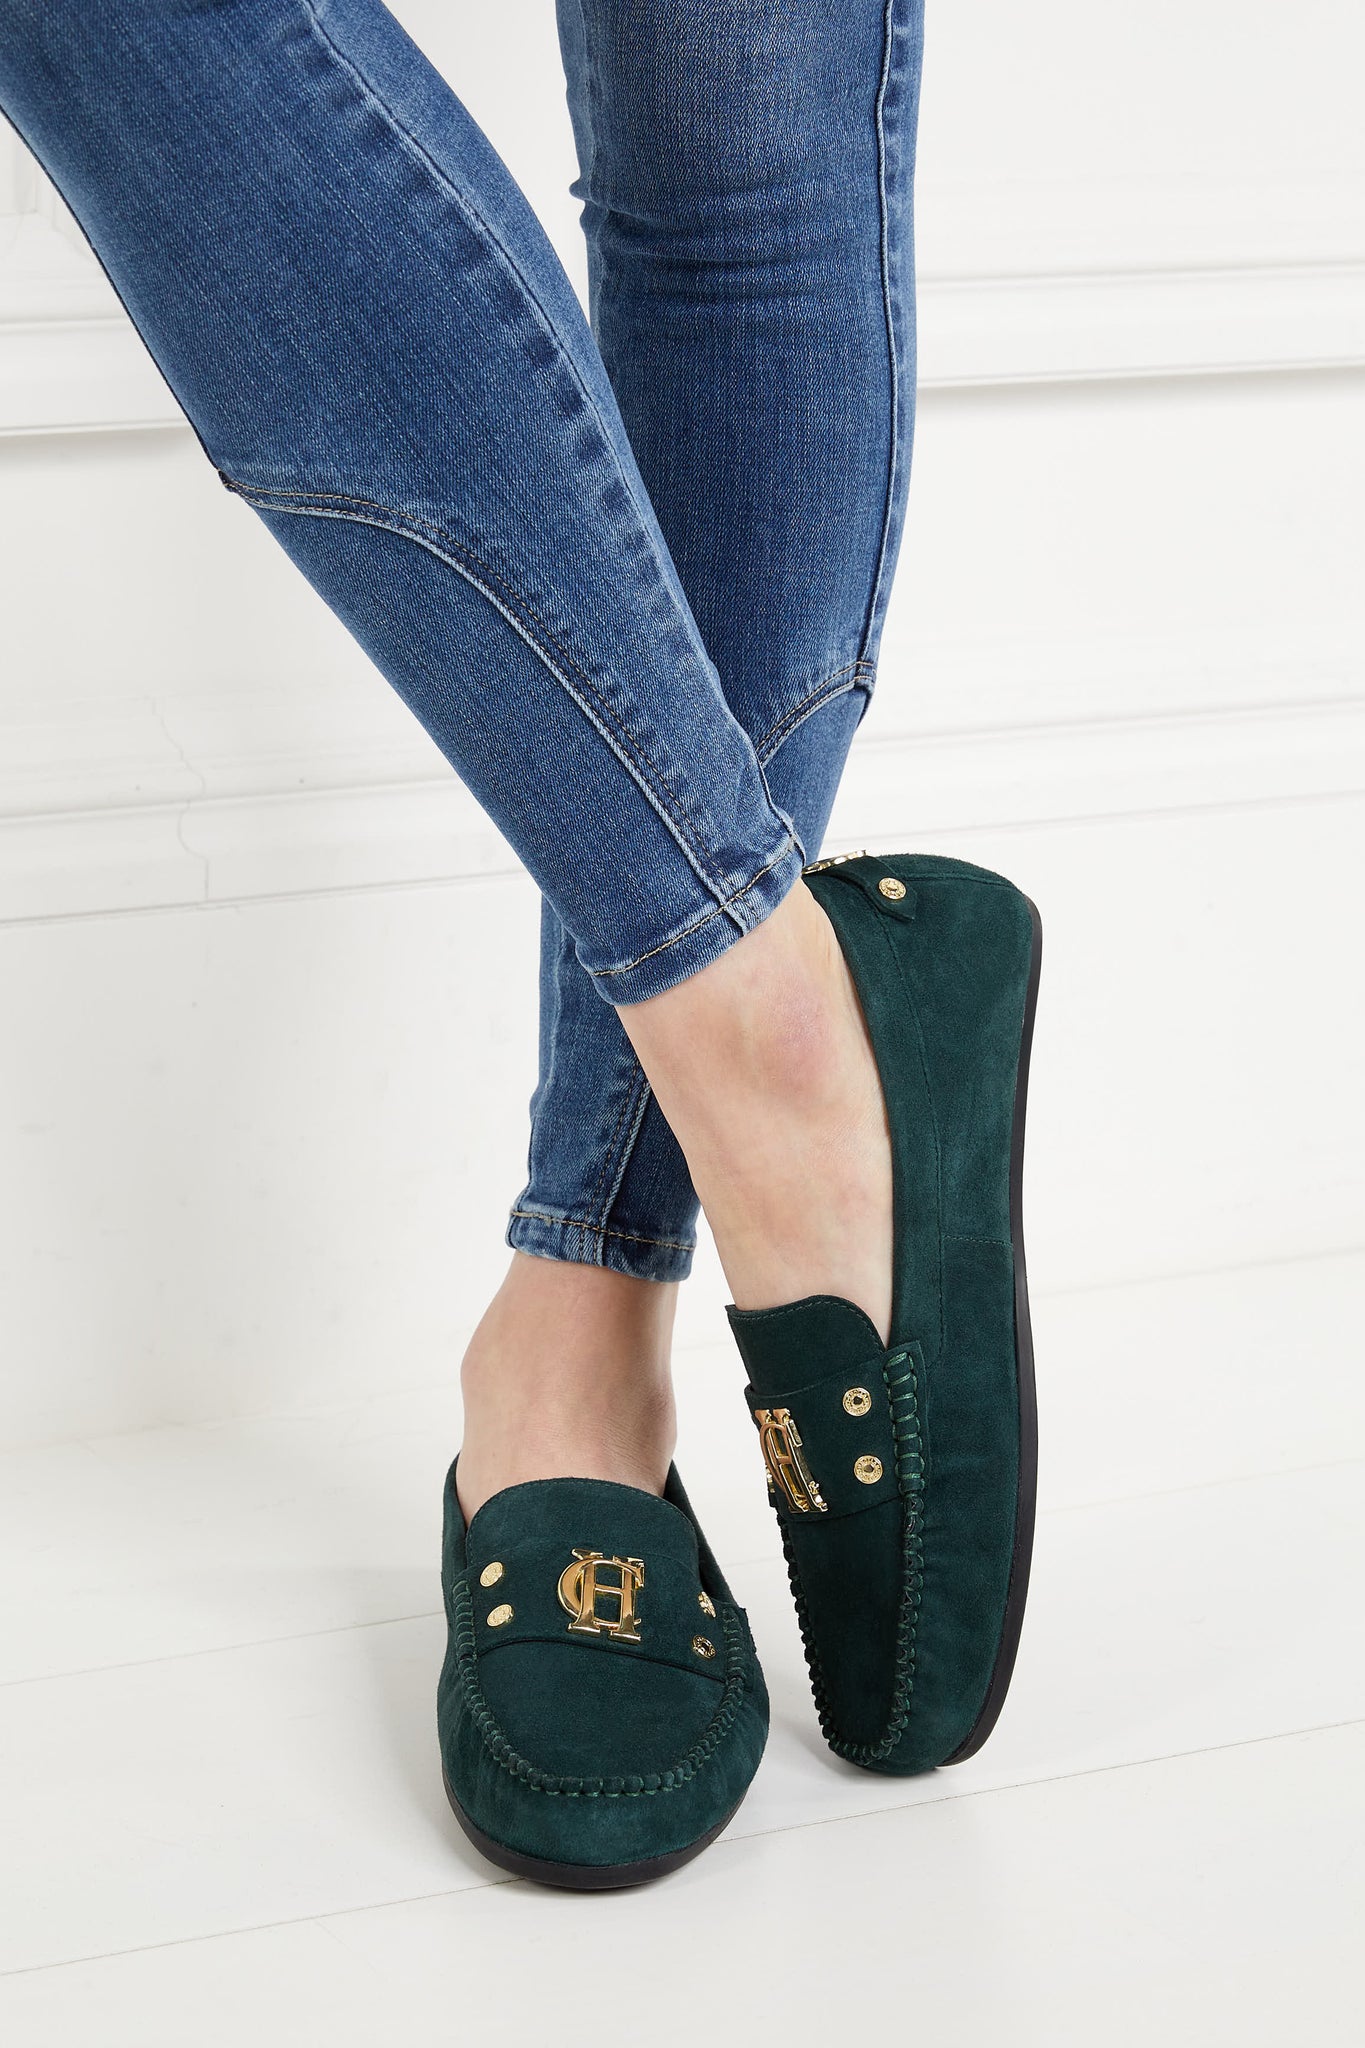 classic emerald green suede loafers with a leather sole and top stitching details and gold hardware paired with a classic denim skinny jean